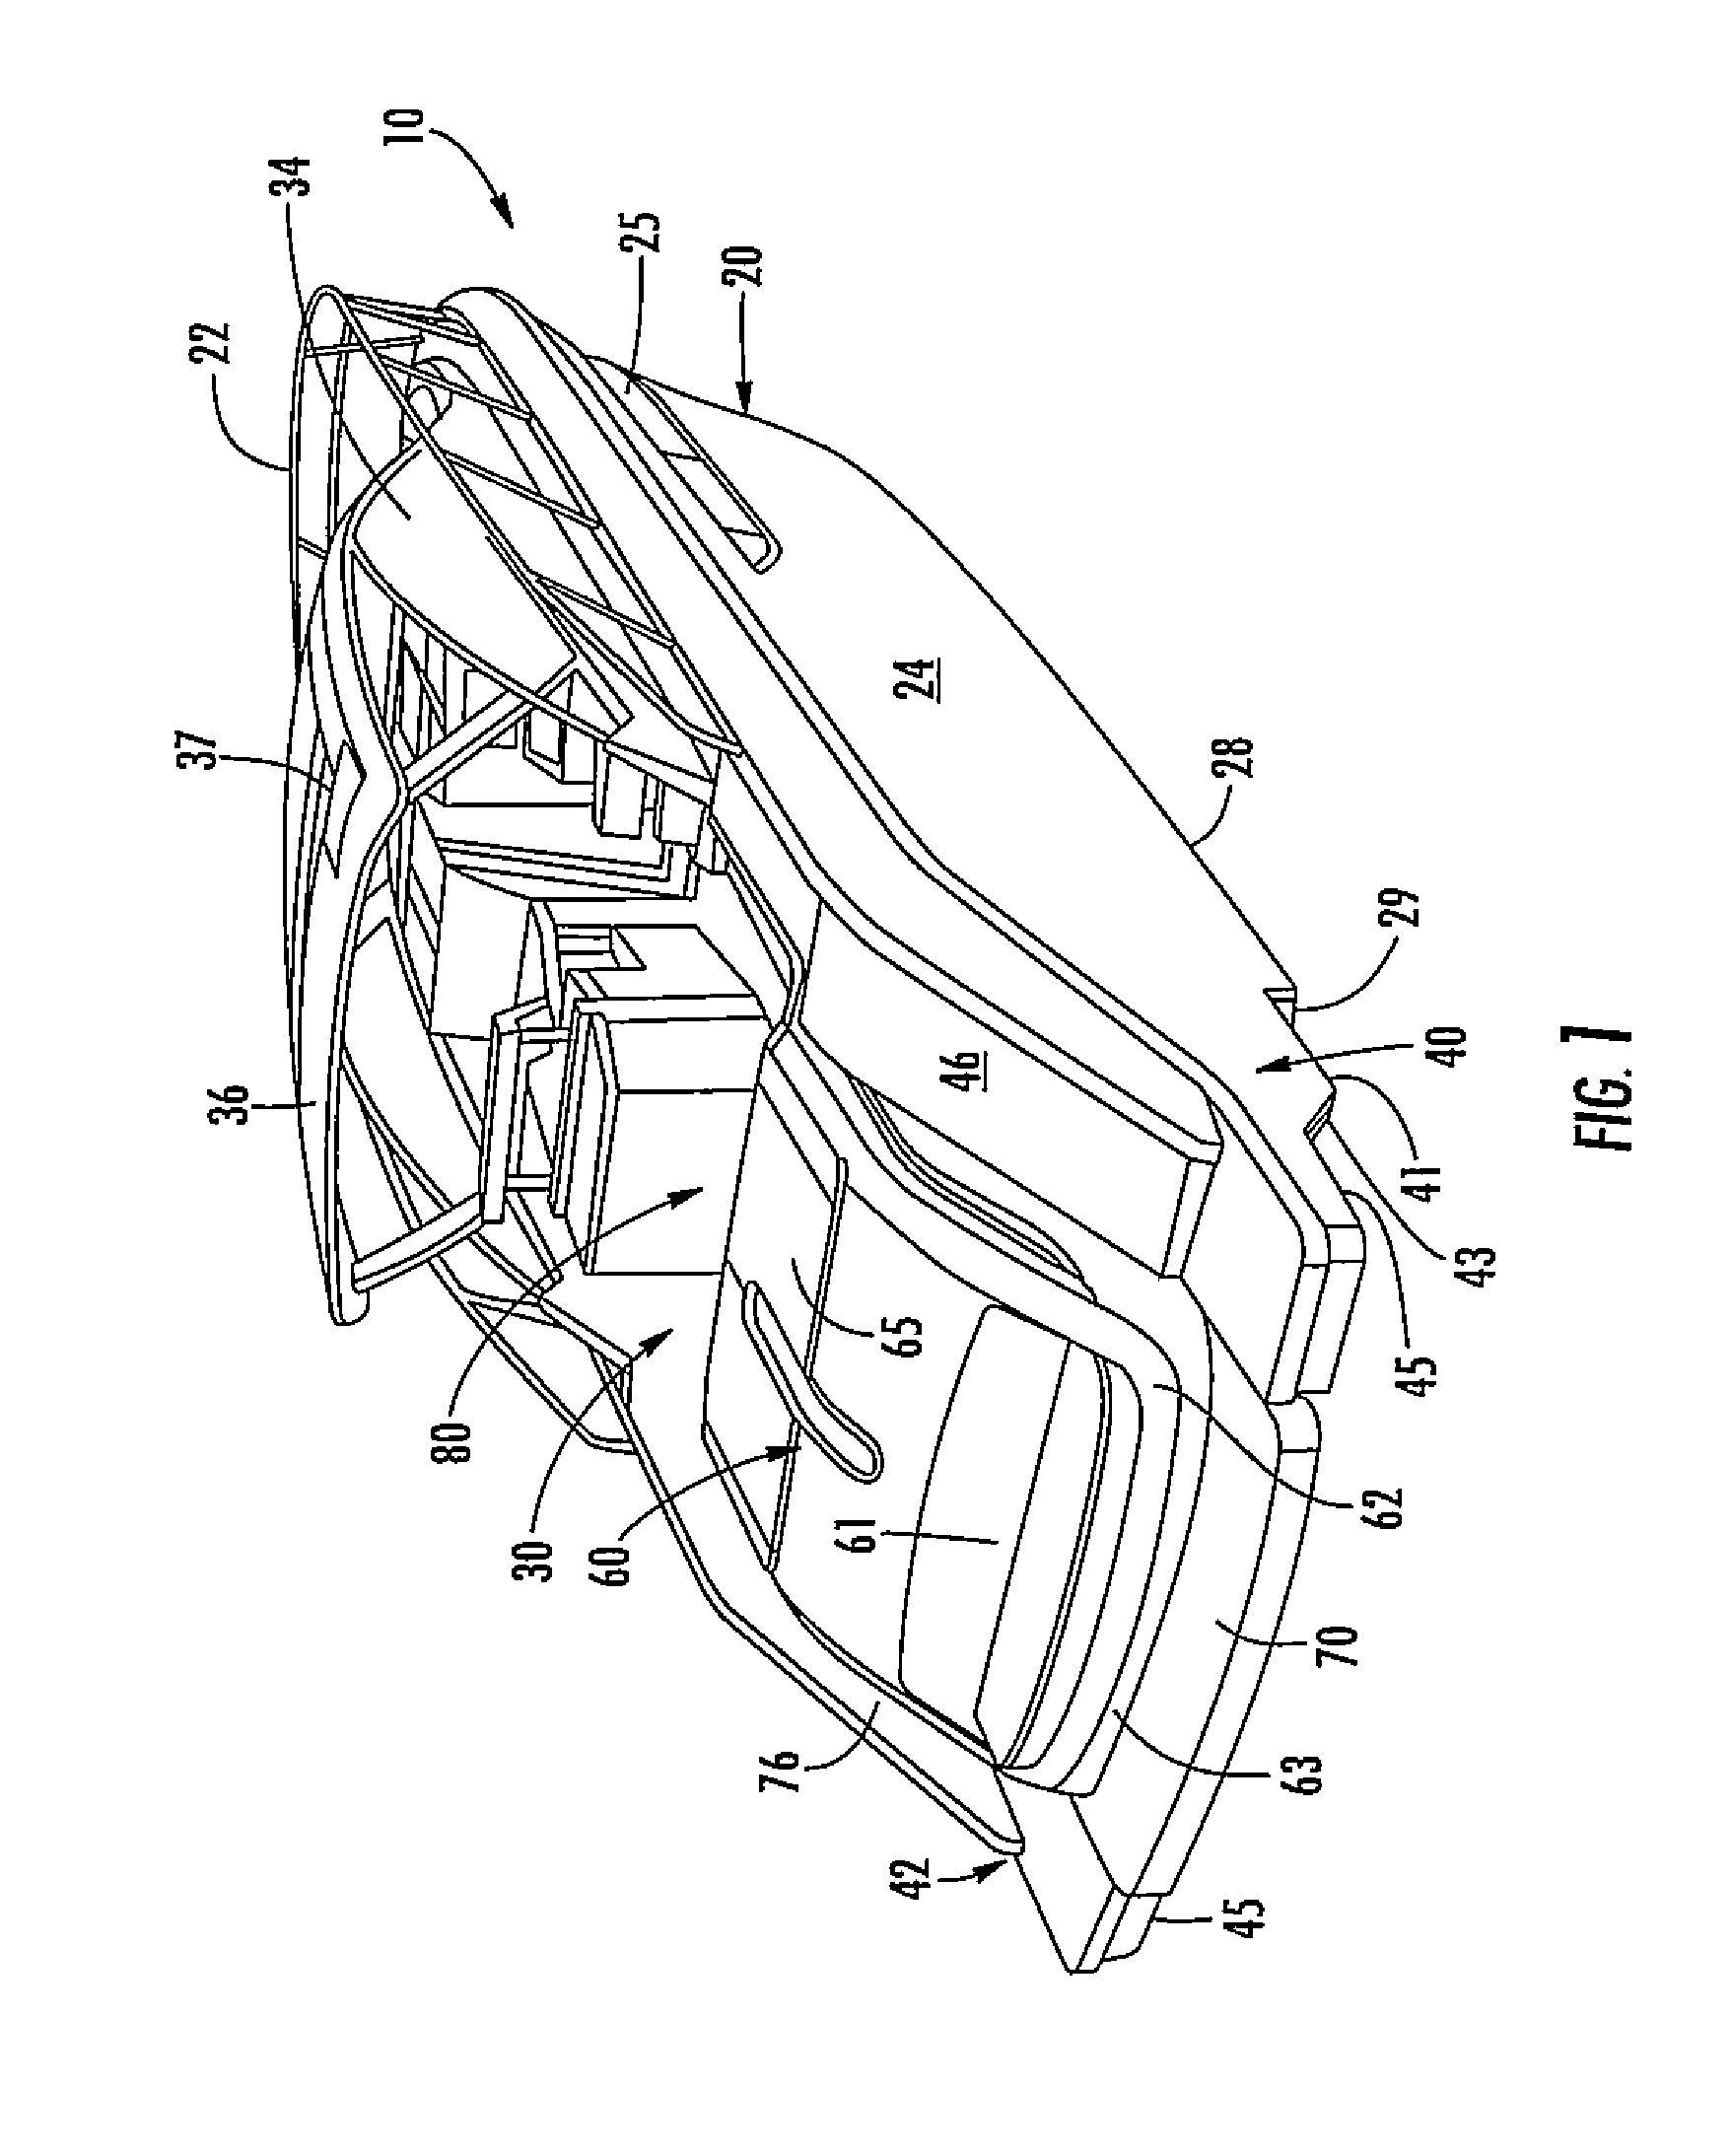 Vessel having extensions for supporting swim platform and concealing outboard engines